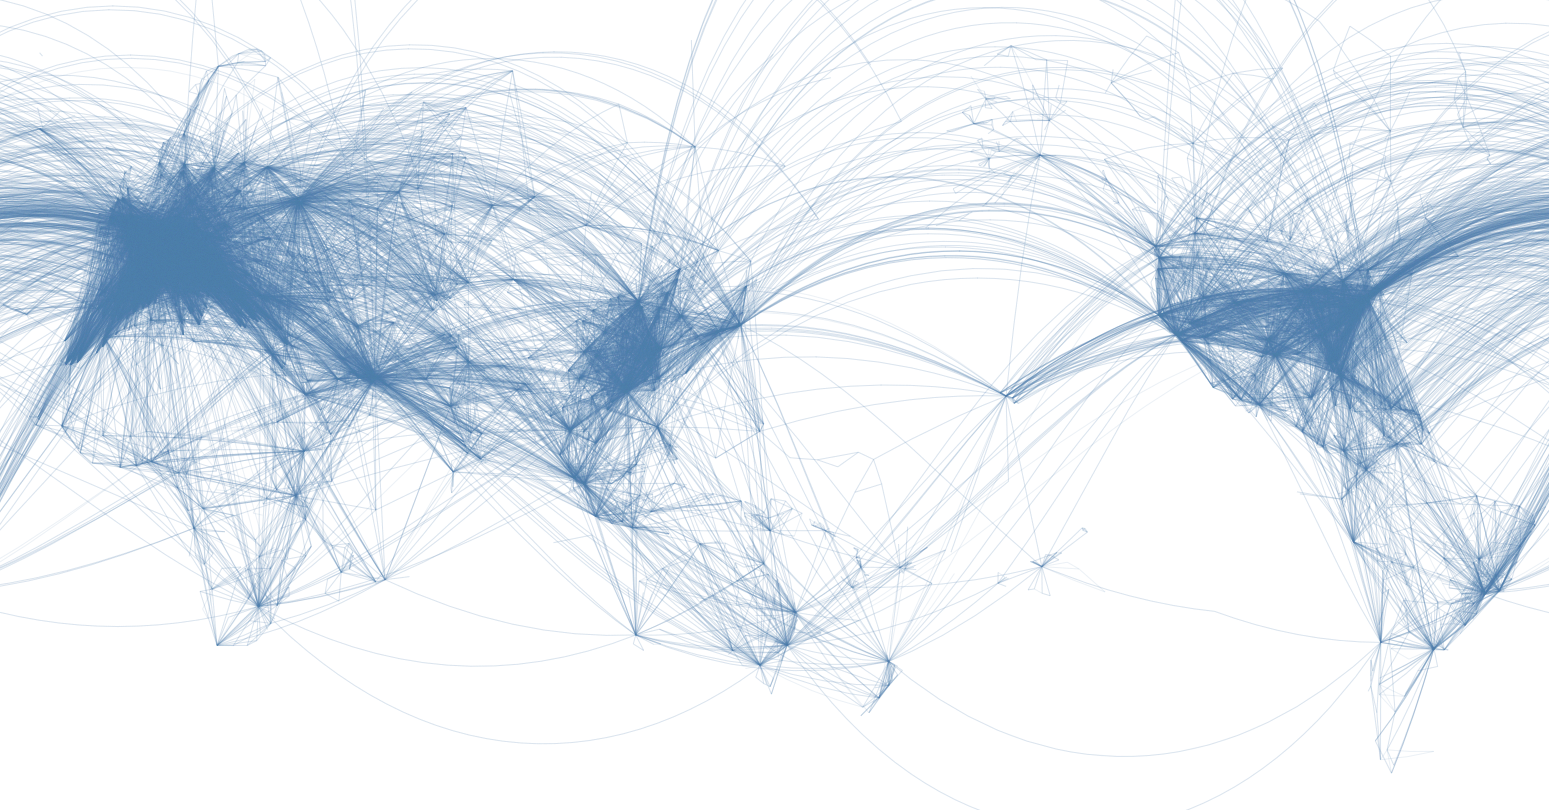 Airline routes across the world